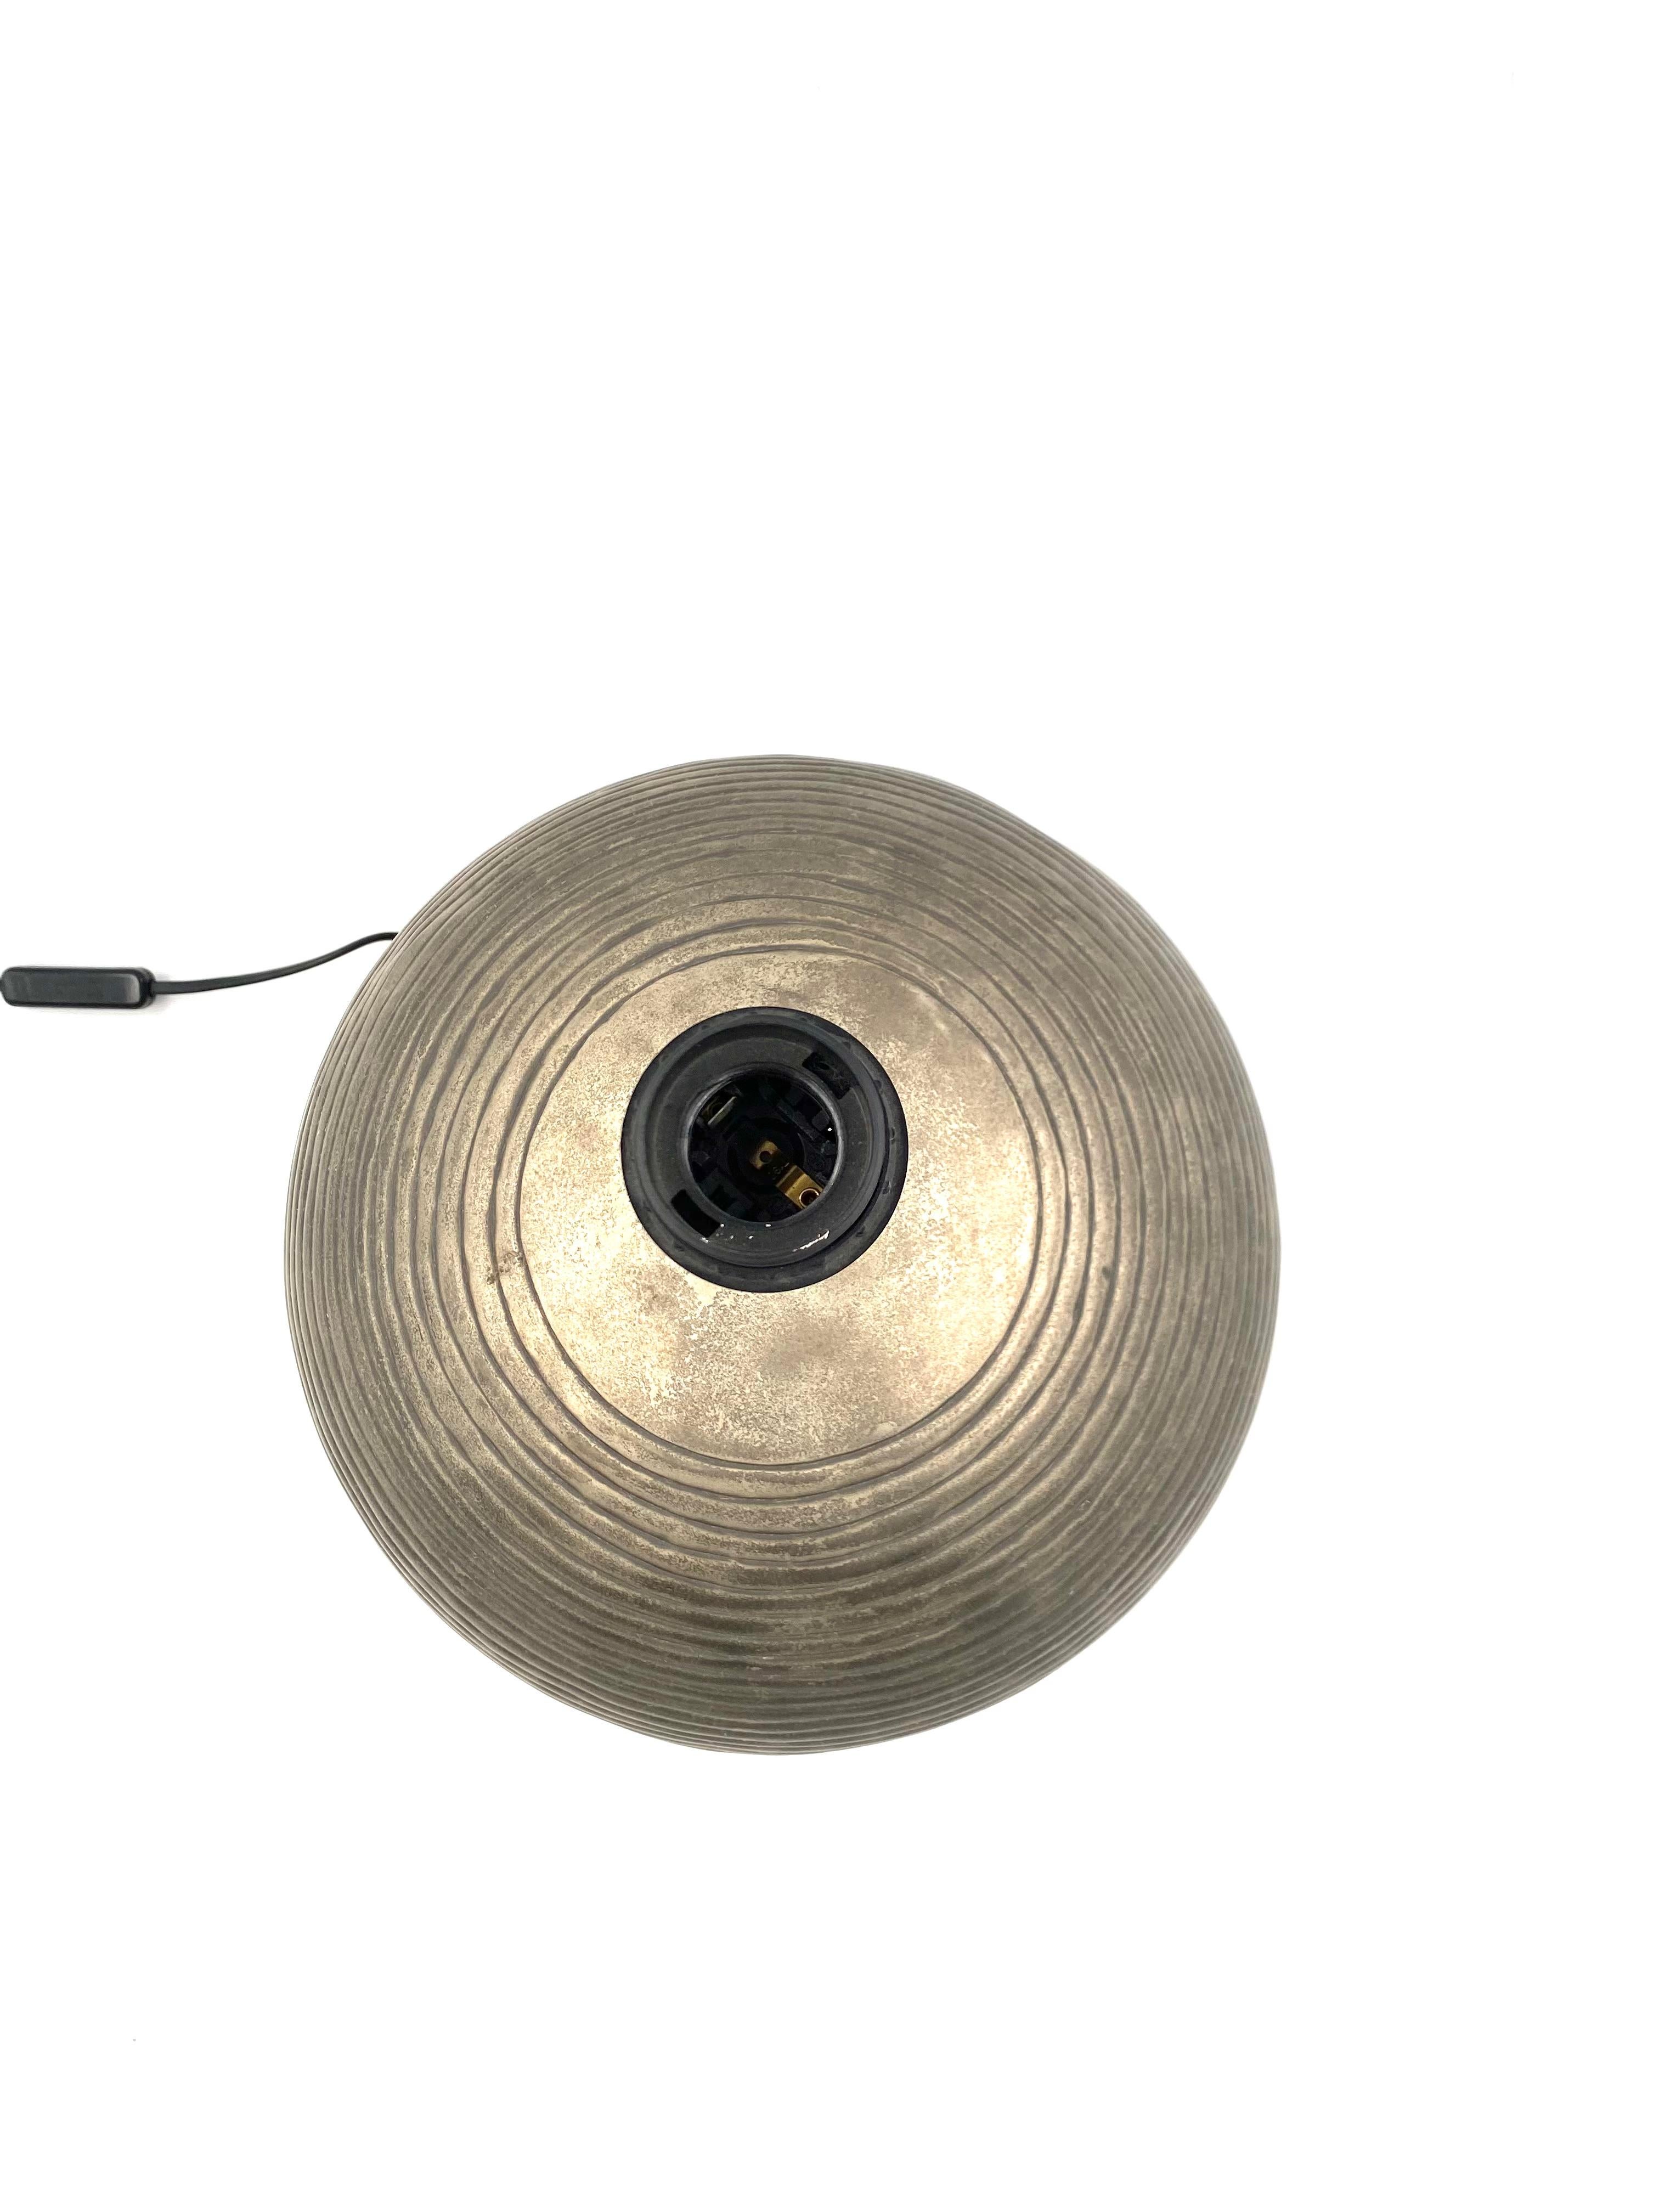 Metal Spherical Table Lamp Base, Italy, 1970s For Sale